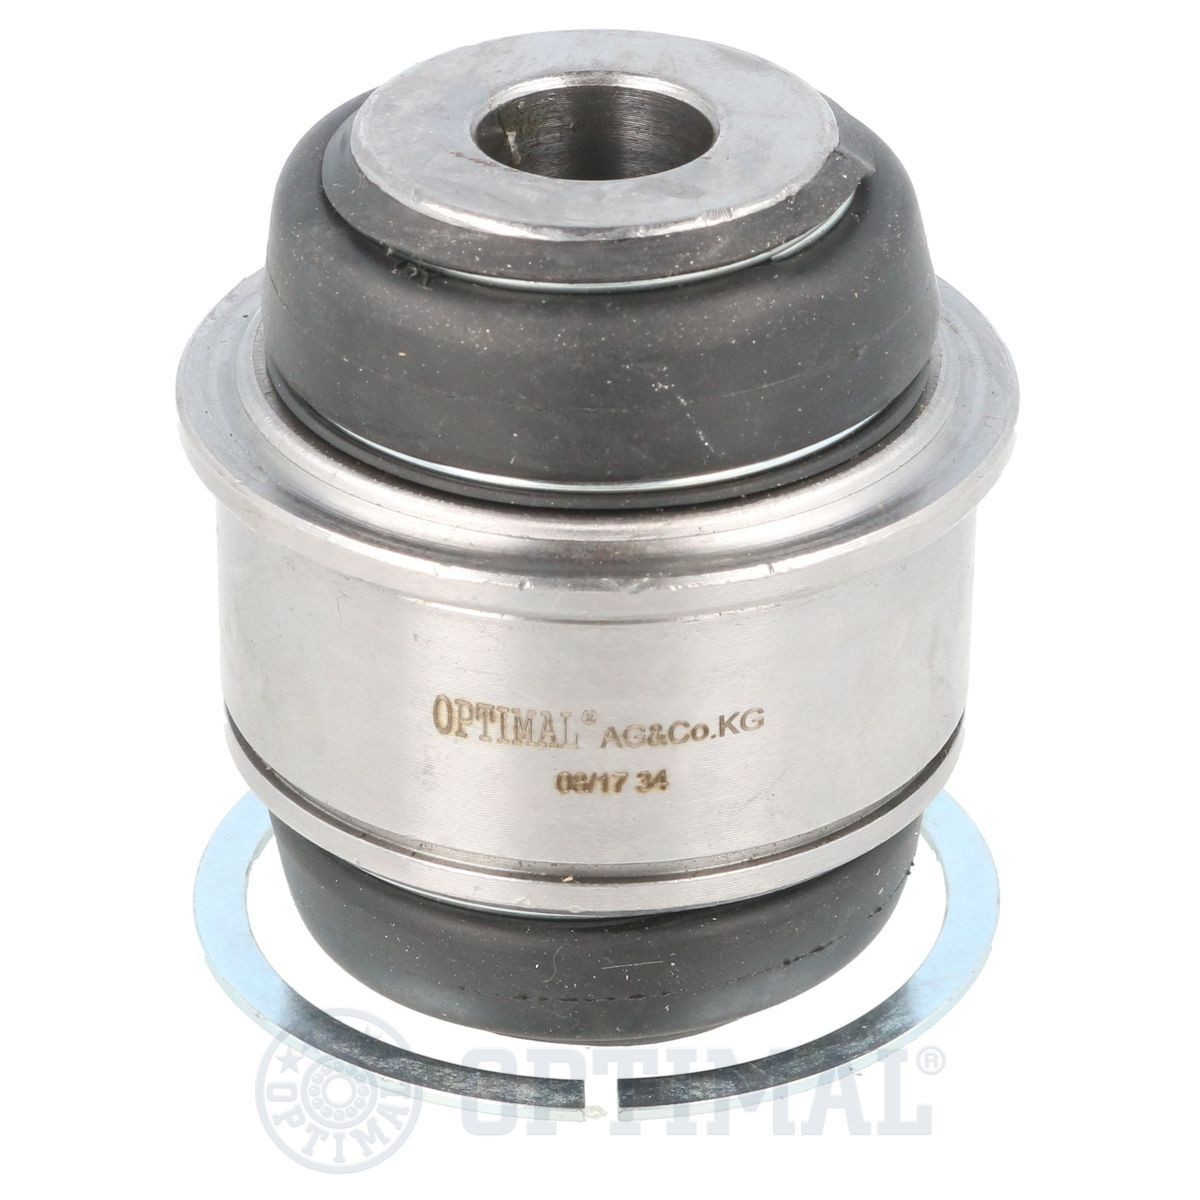 F8-8289 OPTIMAL Suspension bushes LAND ROVER Rear Axle, both sides